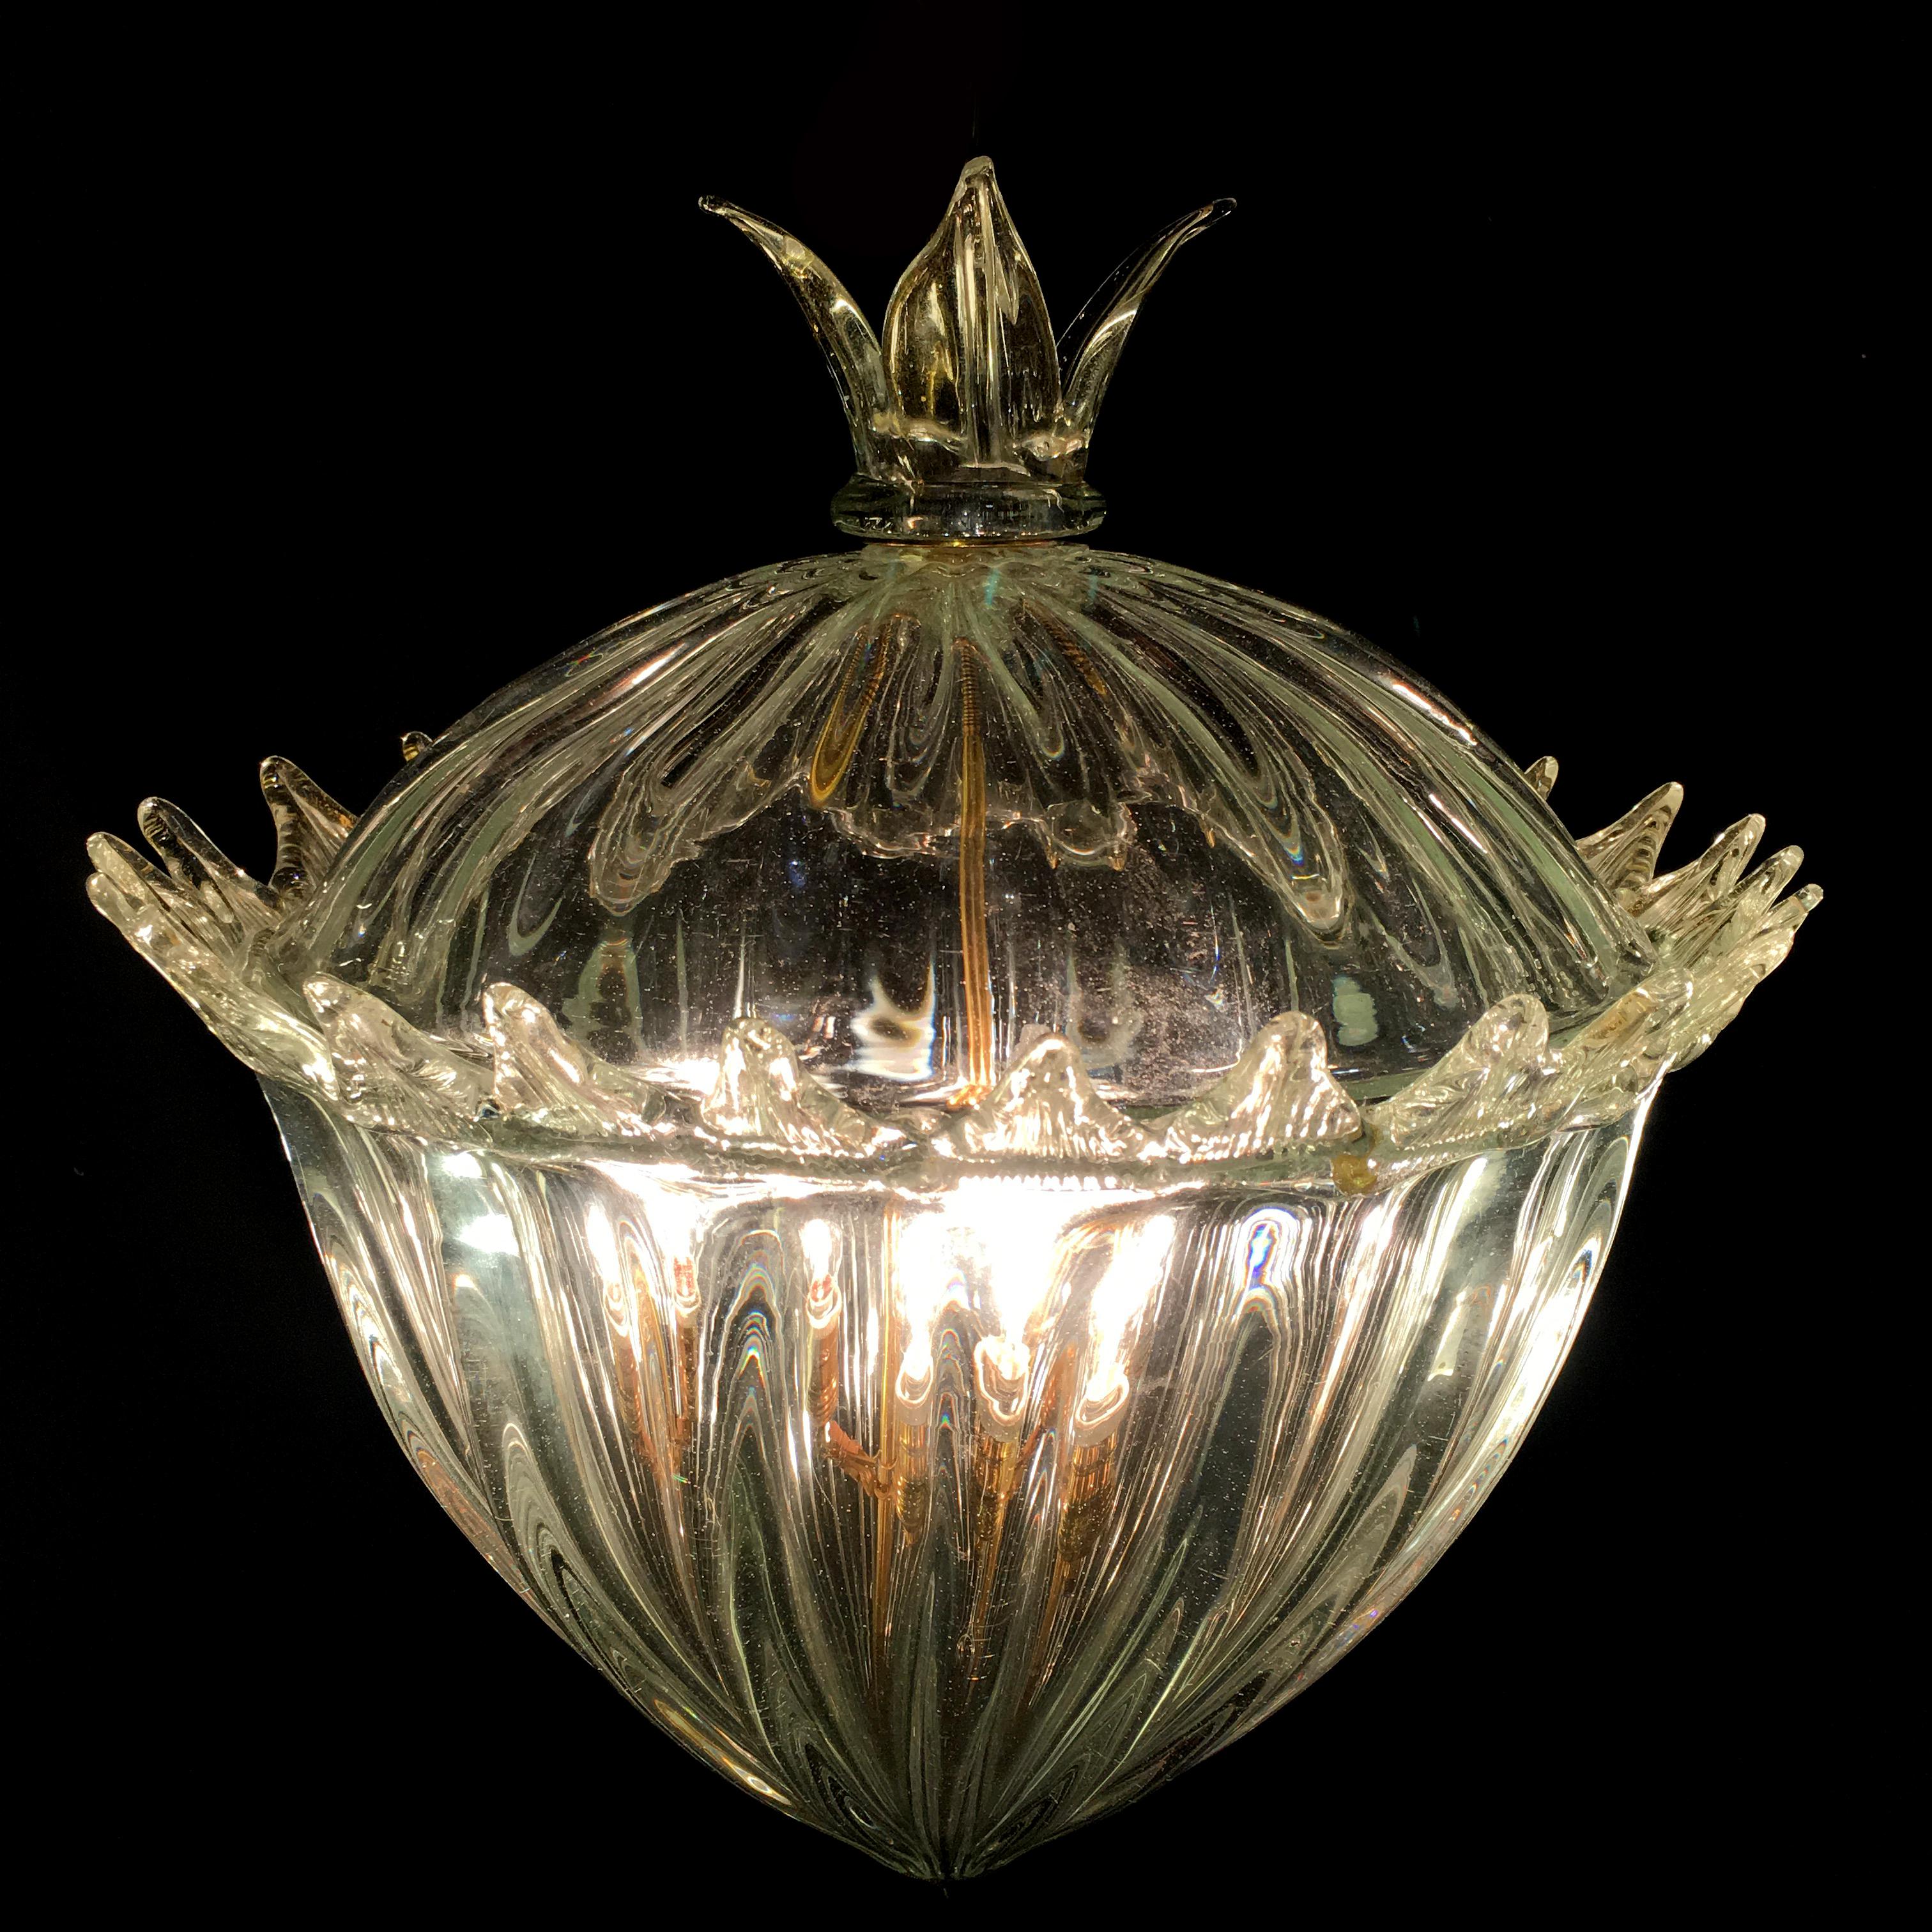 Piece of incredible beauty in massive Murano glass with inclusions of gold. The pair is made up of two equal chandeliers, one has a diameter of 42 cm and the other of 46 cm. The height of both is 100 cm. They can also be purchased individually.